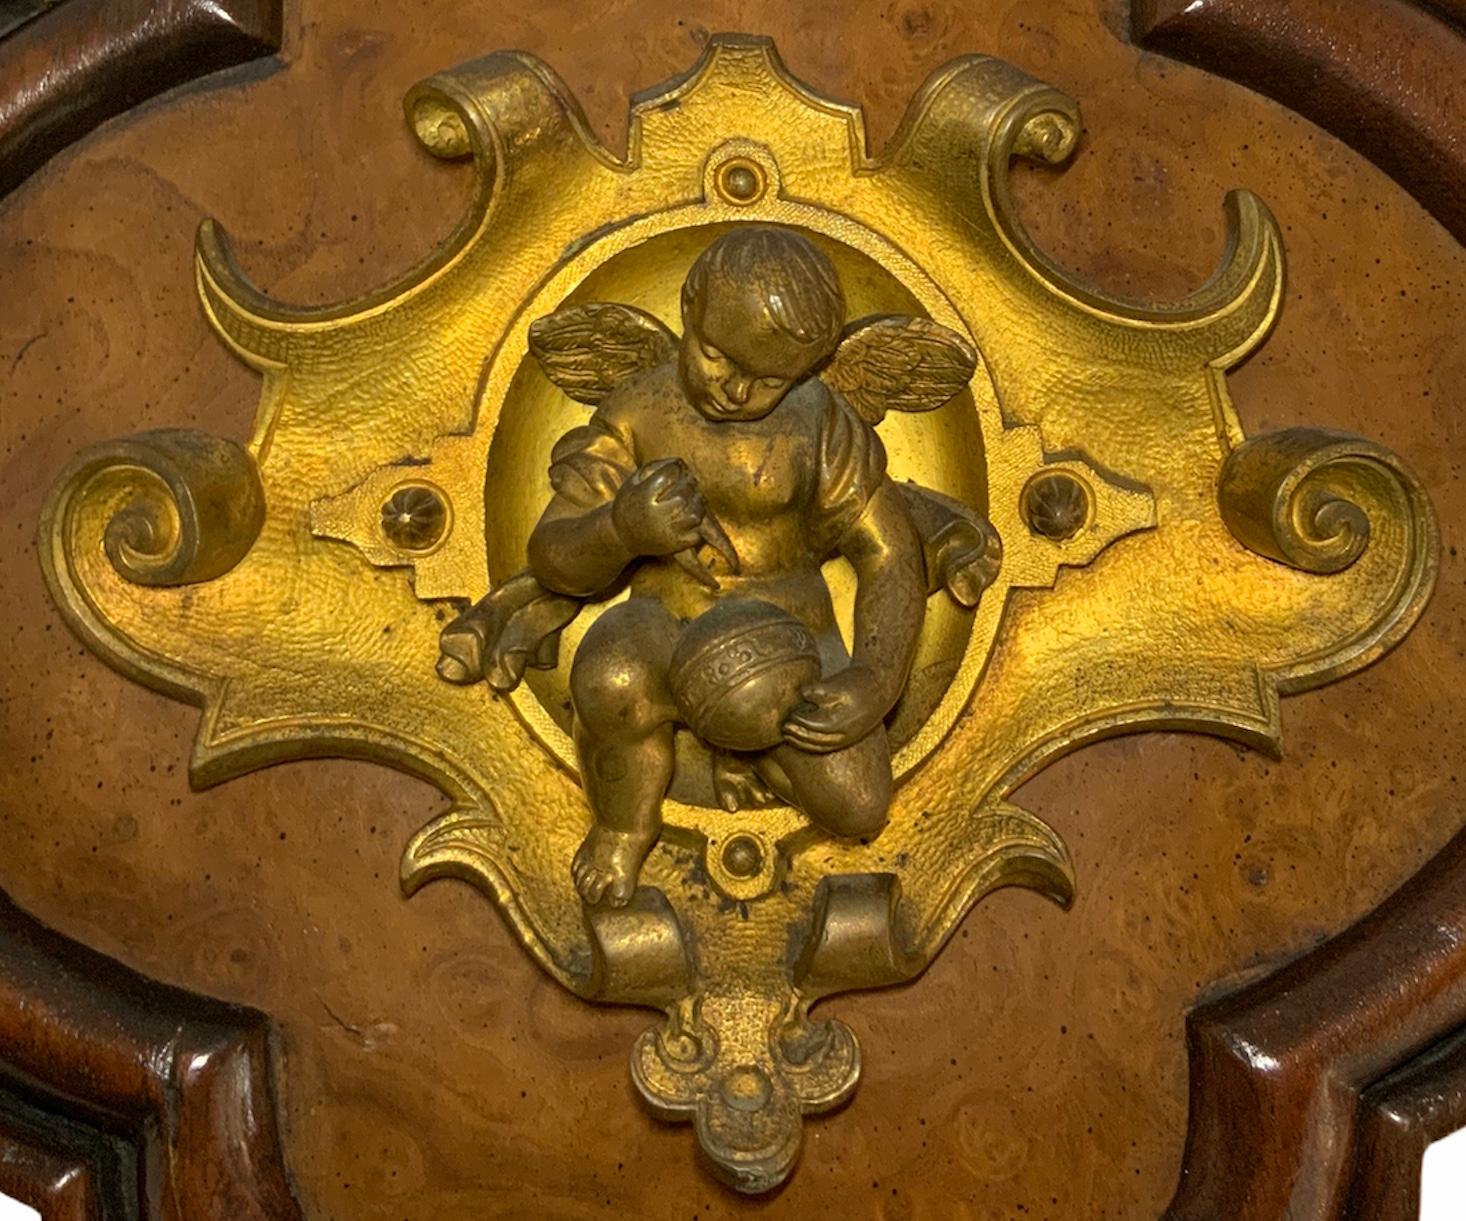 This plaque depicts a bronze winged cherub who is working with a tool in his right hand trying to fix a round object held in his left hand. He is kneeling in one leg over a bronze shaped scrolls border plaque. This in turn stands in a quatrefoil